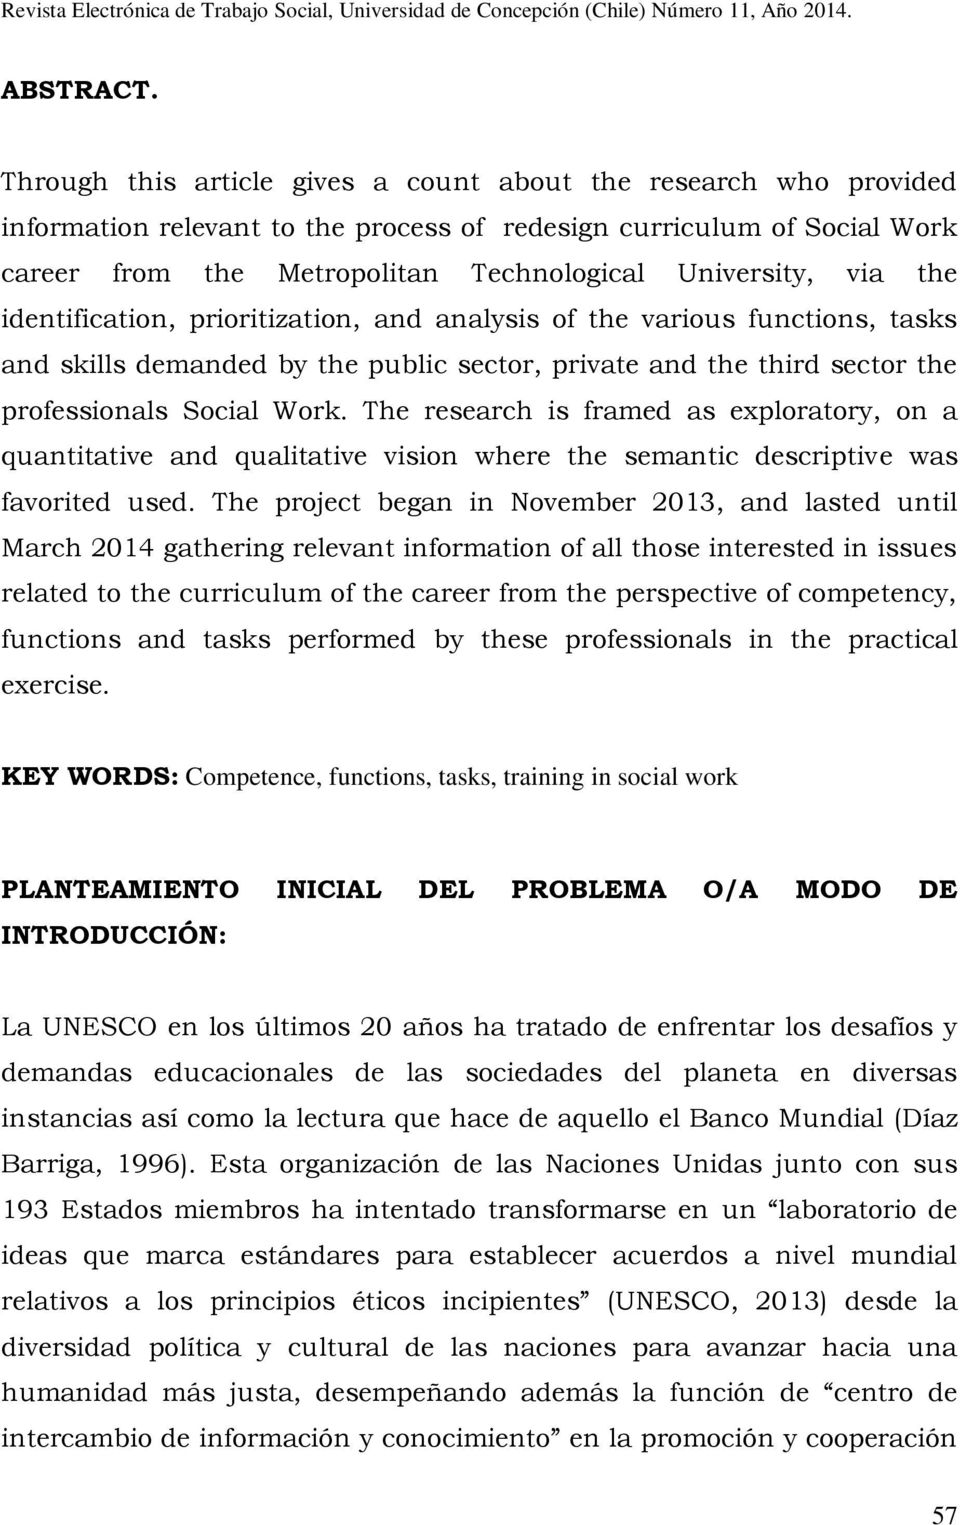 the identification, prioritization, and analysis of the various functions, tasks and skills demanded by the public sector, private and the third sector the professionals Social Work.